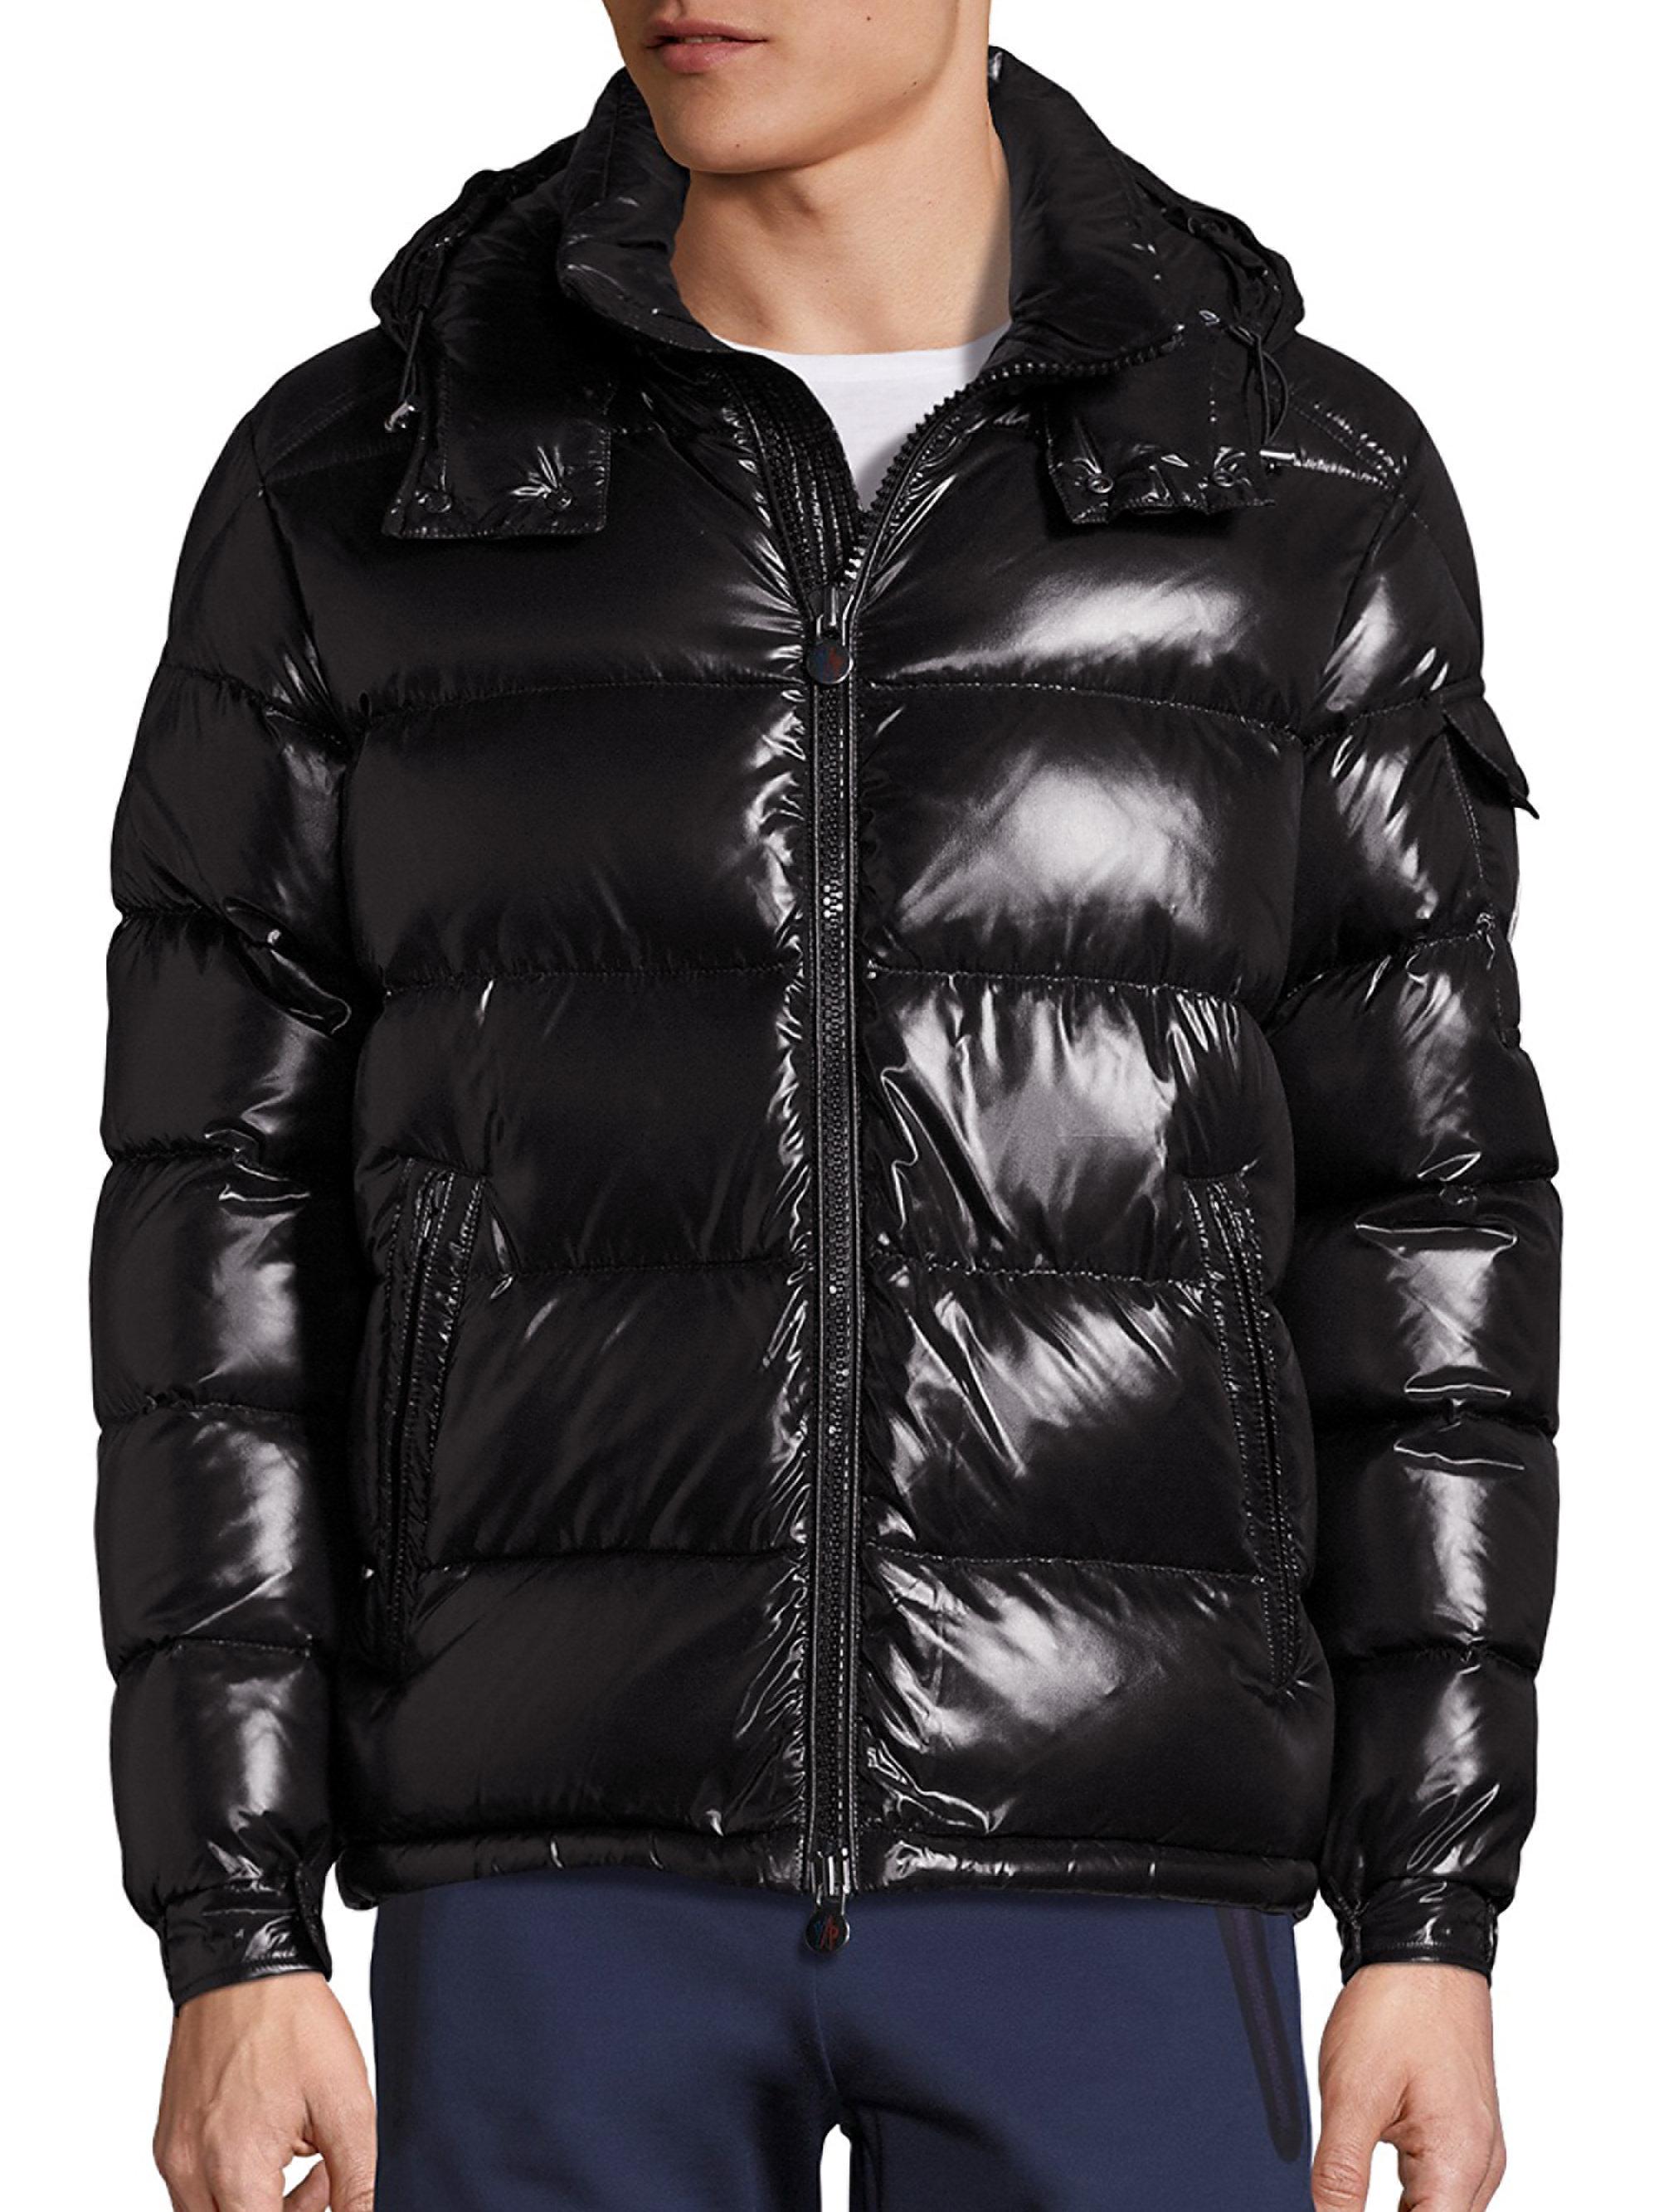 Moncler Synthetic Maya Shiny Puffer Jacket in Black for Men - Lyst